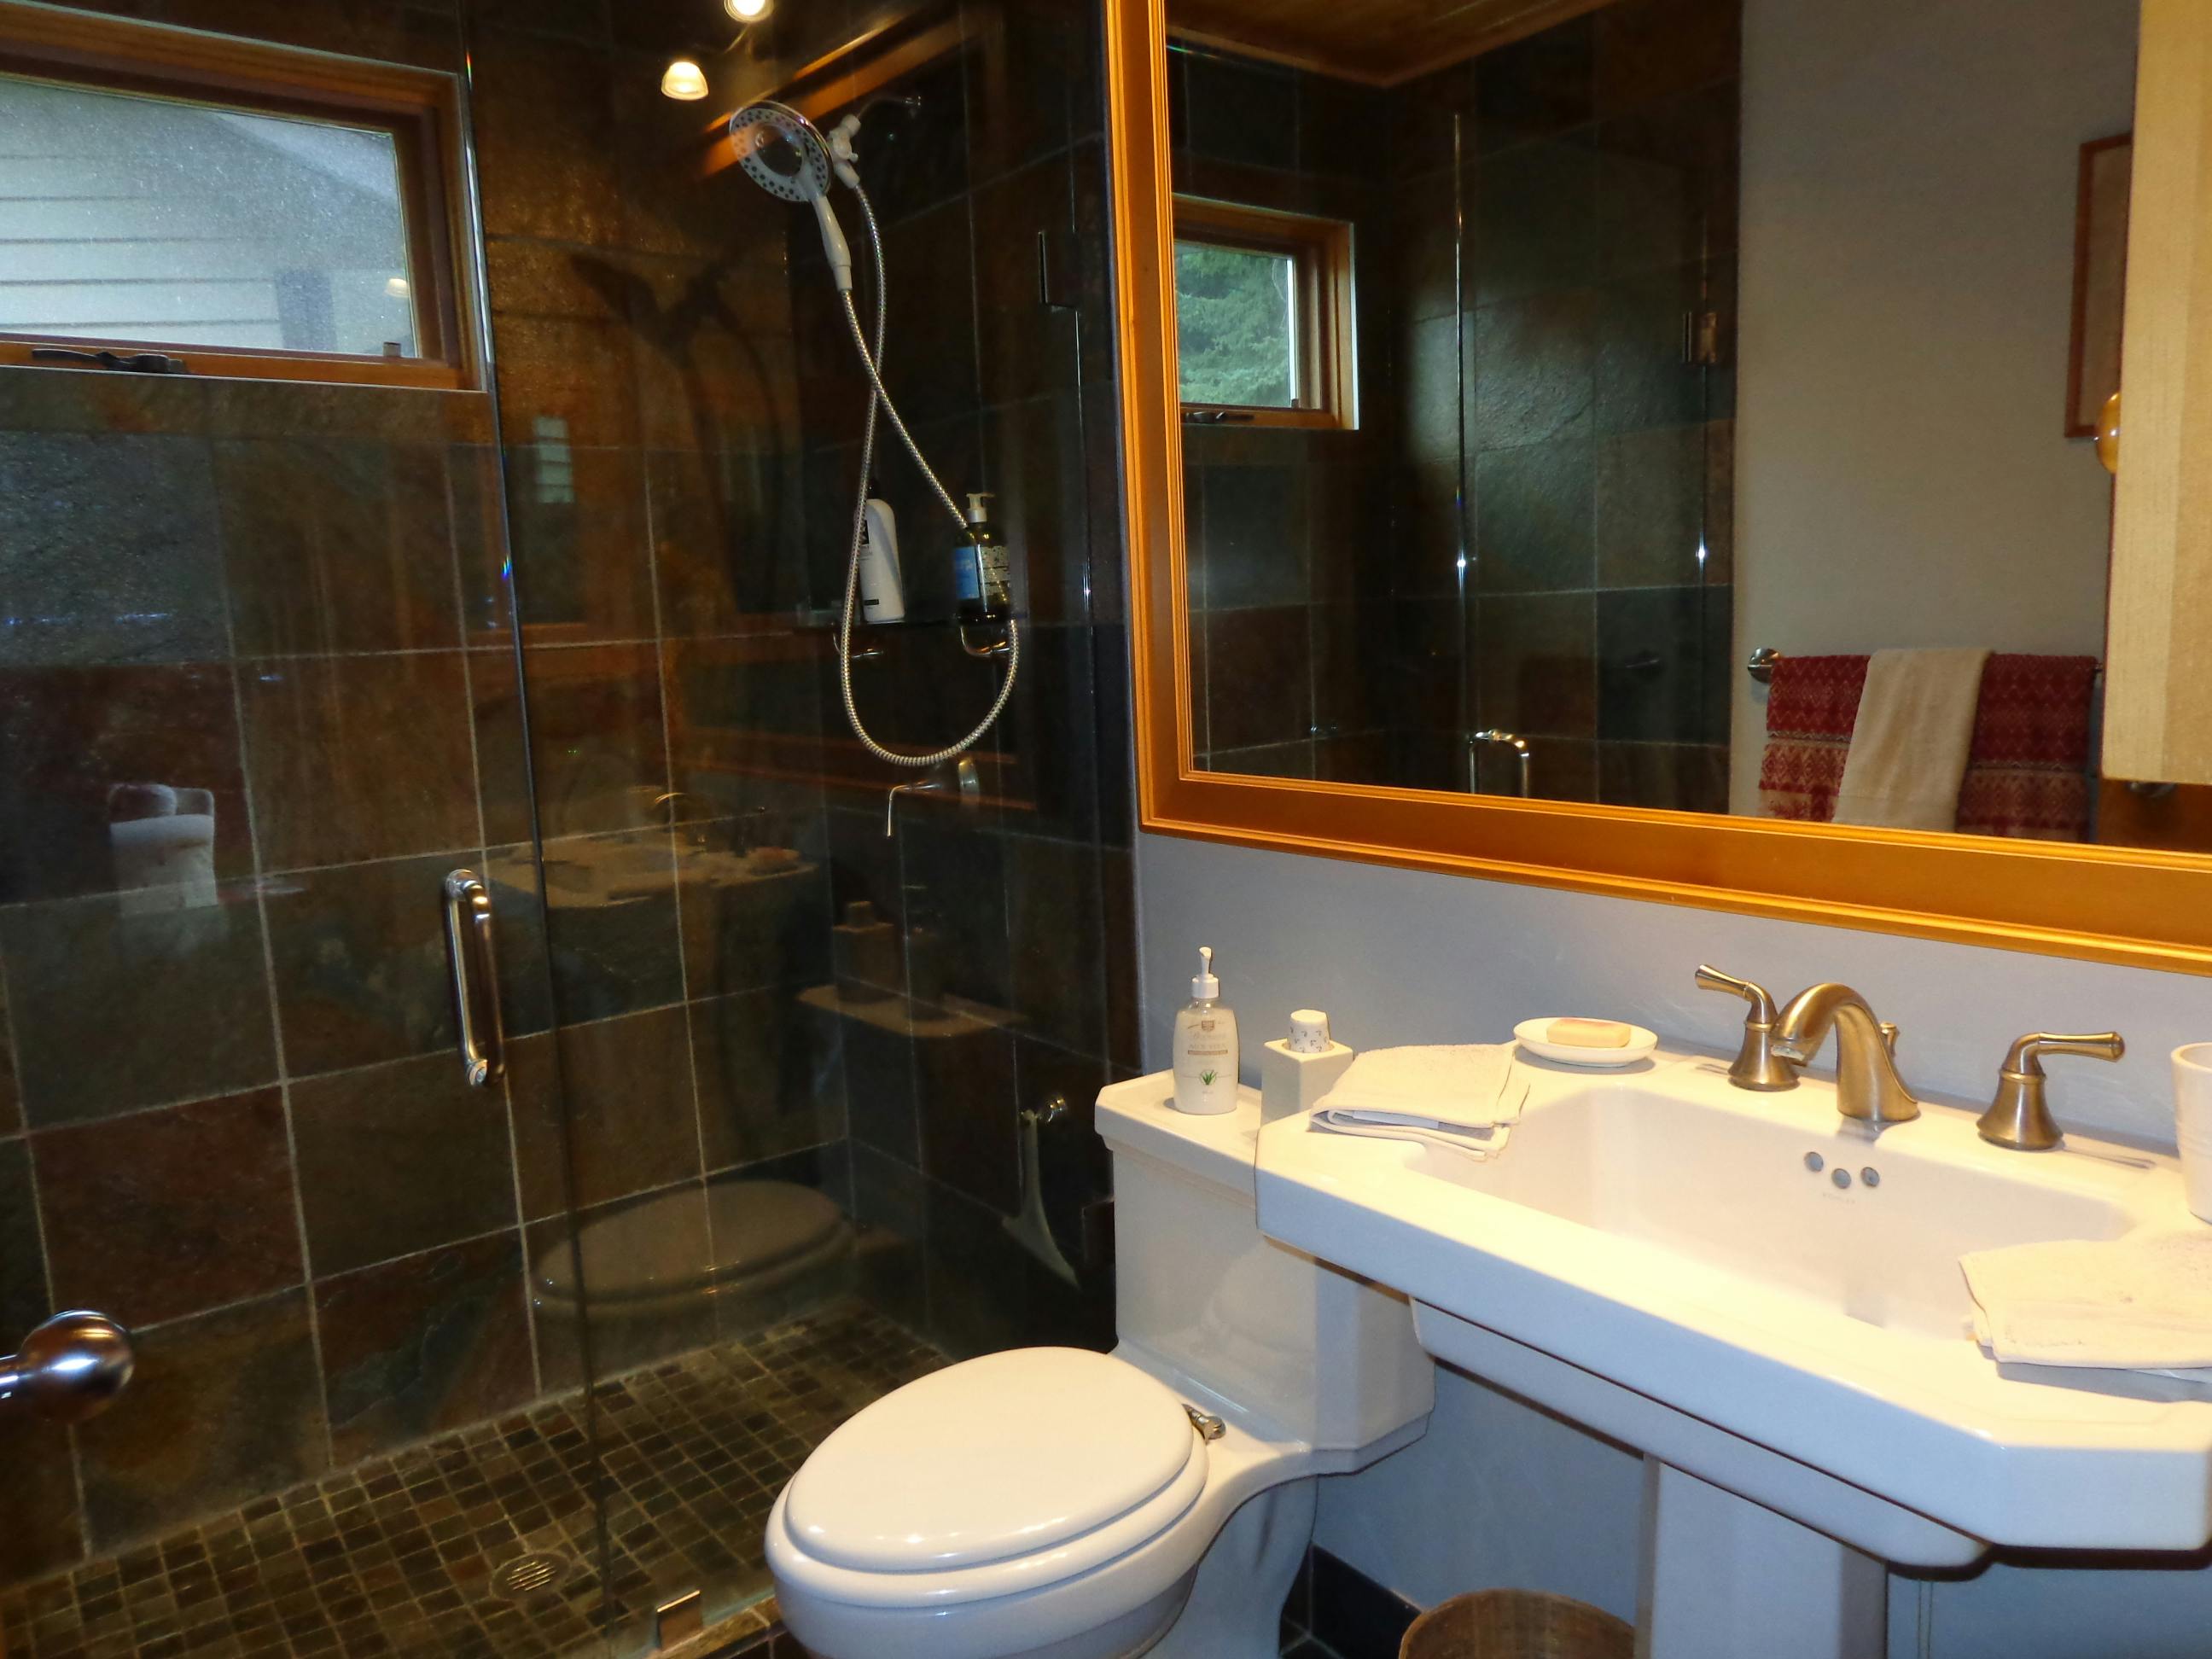 Garden View suite has stylish private bathroom with full shower